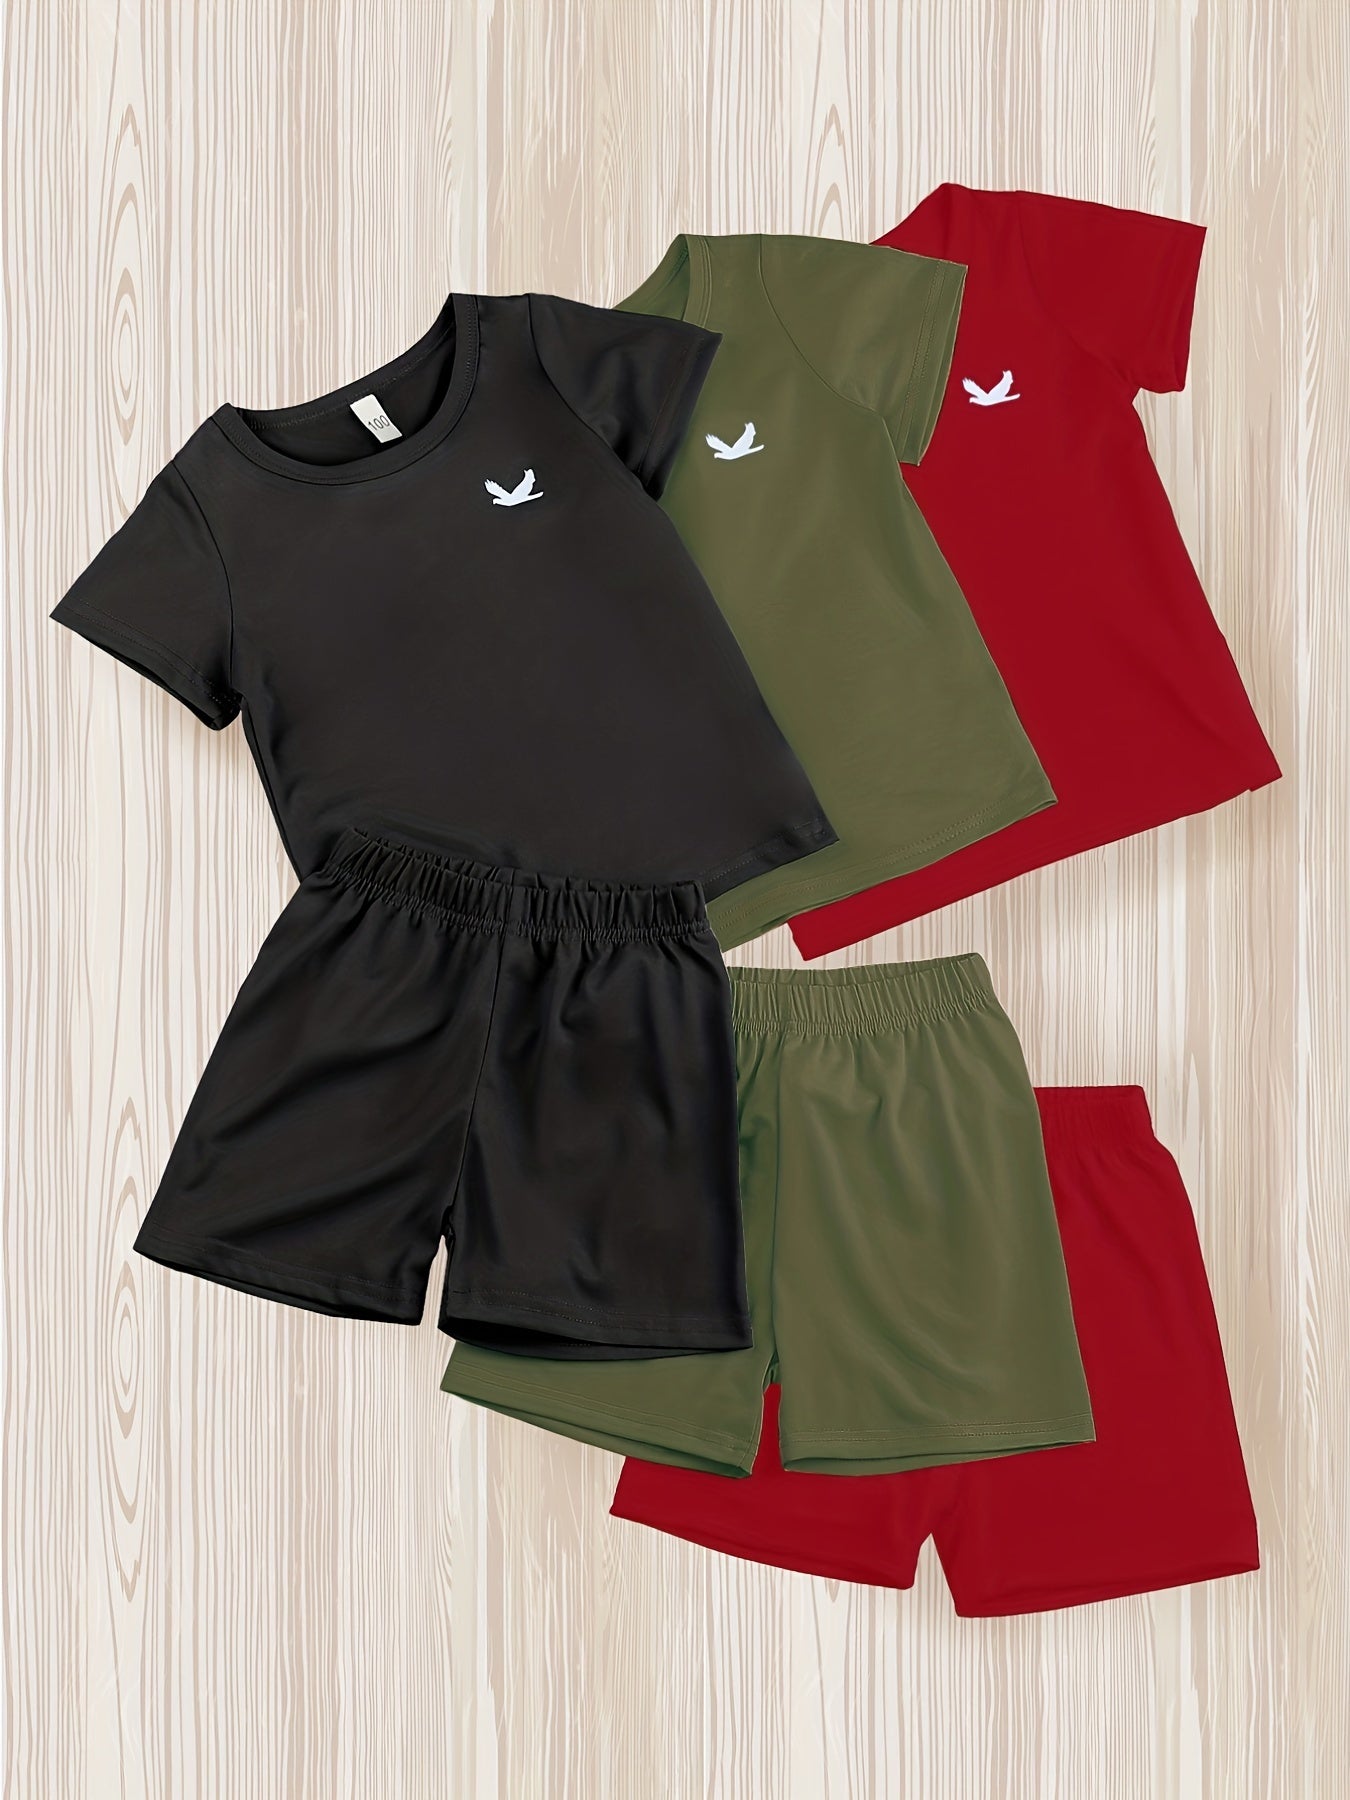 3pcs Boys Pigeon Outfit Shorts & T-shirt Short Sleeves Crew Neck Casual Summer Kids Clothes